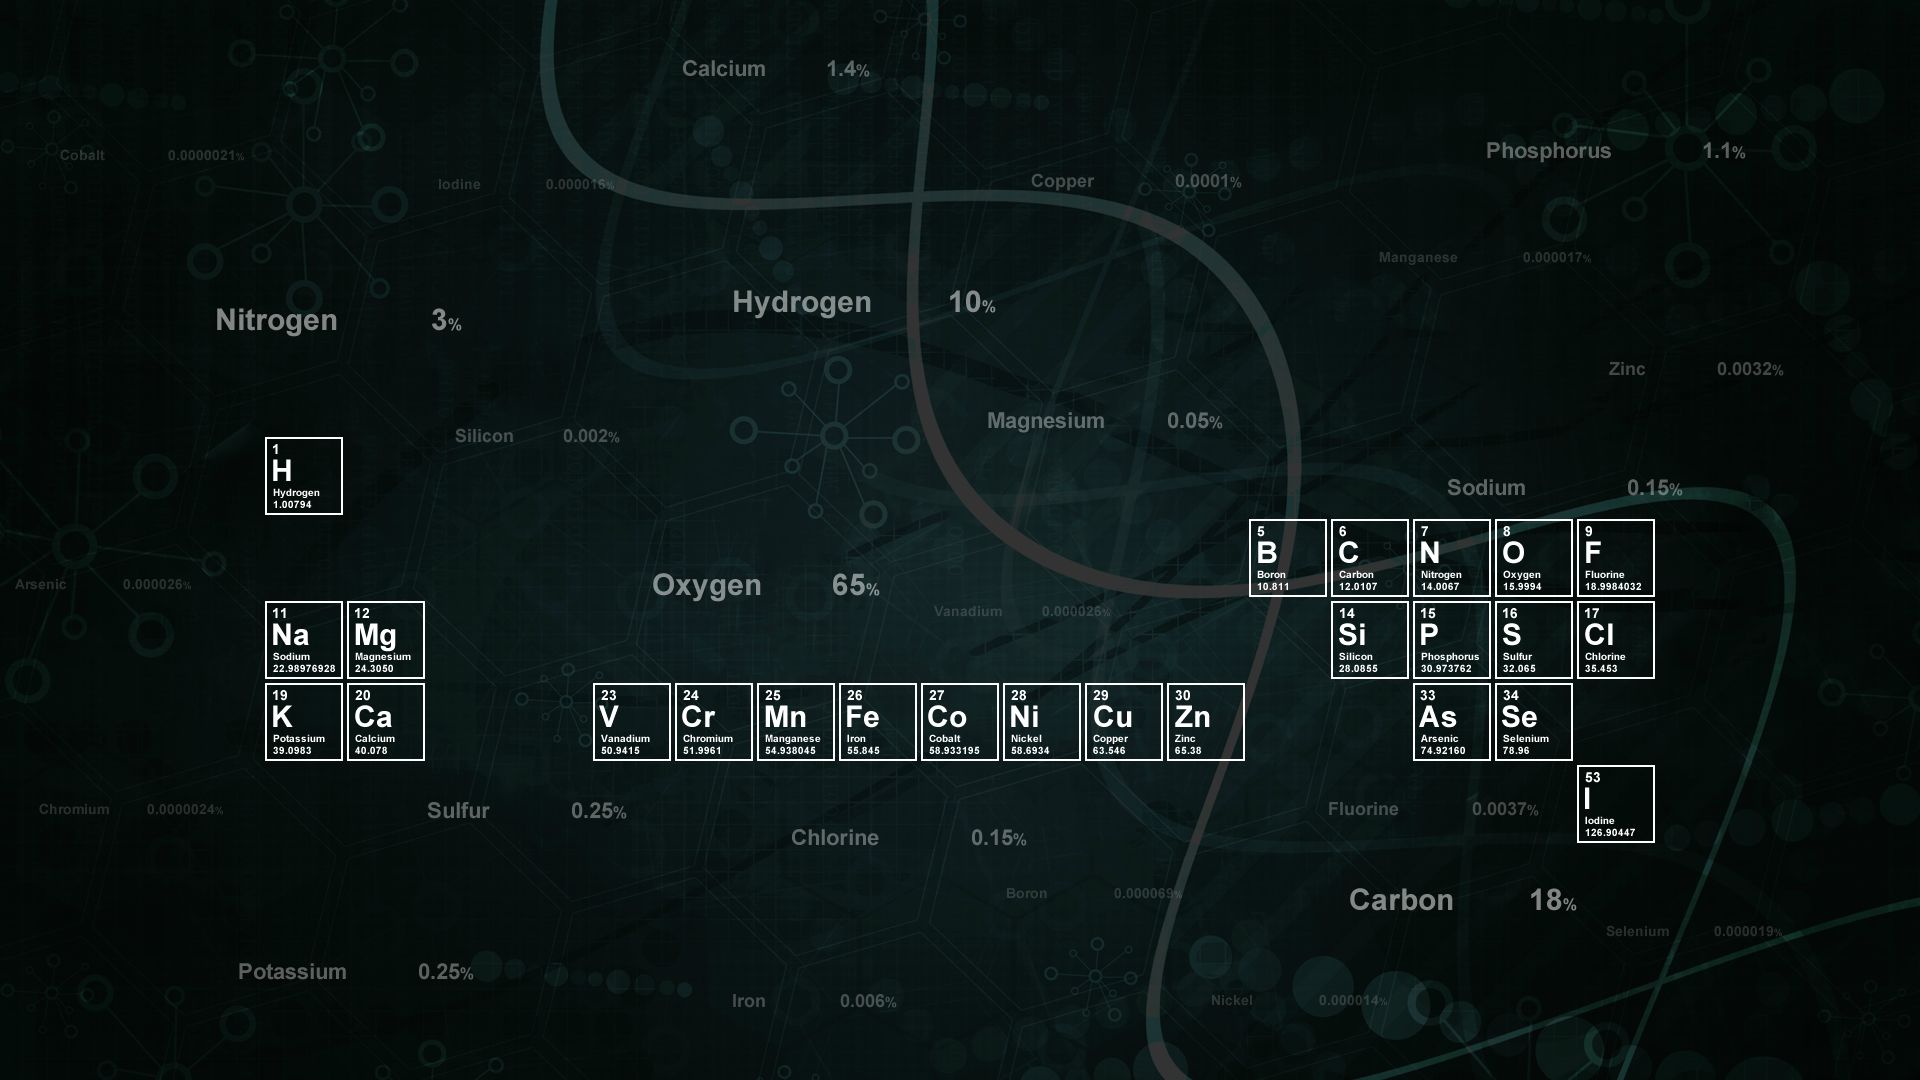 breaking bad chemistry backgrounds